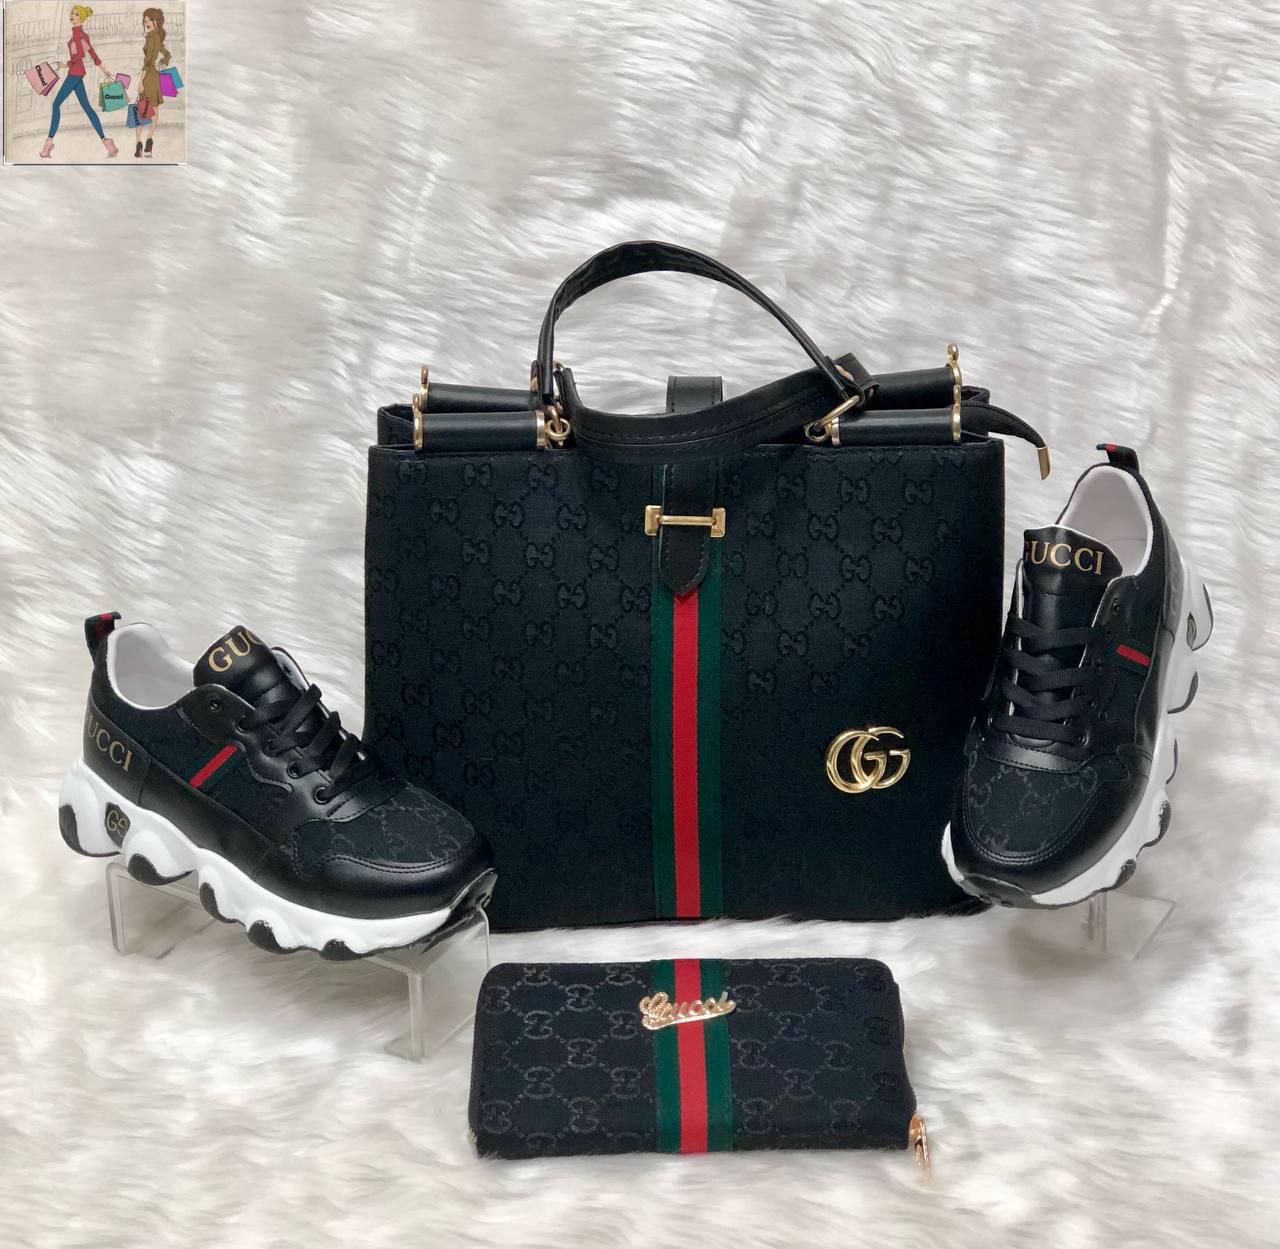 Gucci sneakers and handbags with wallet